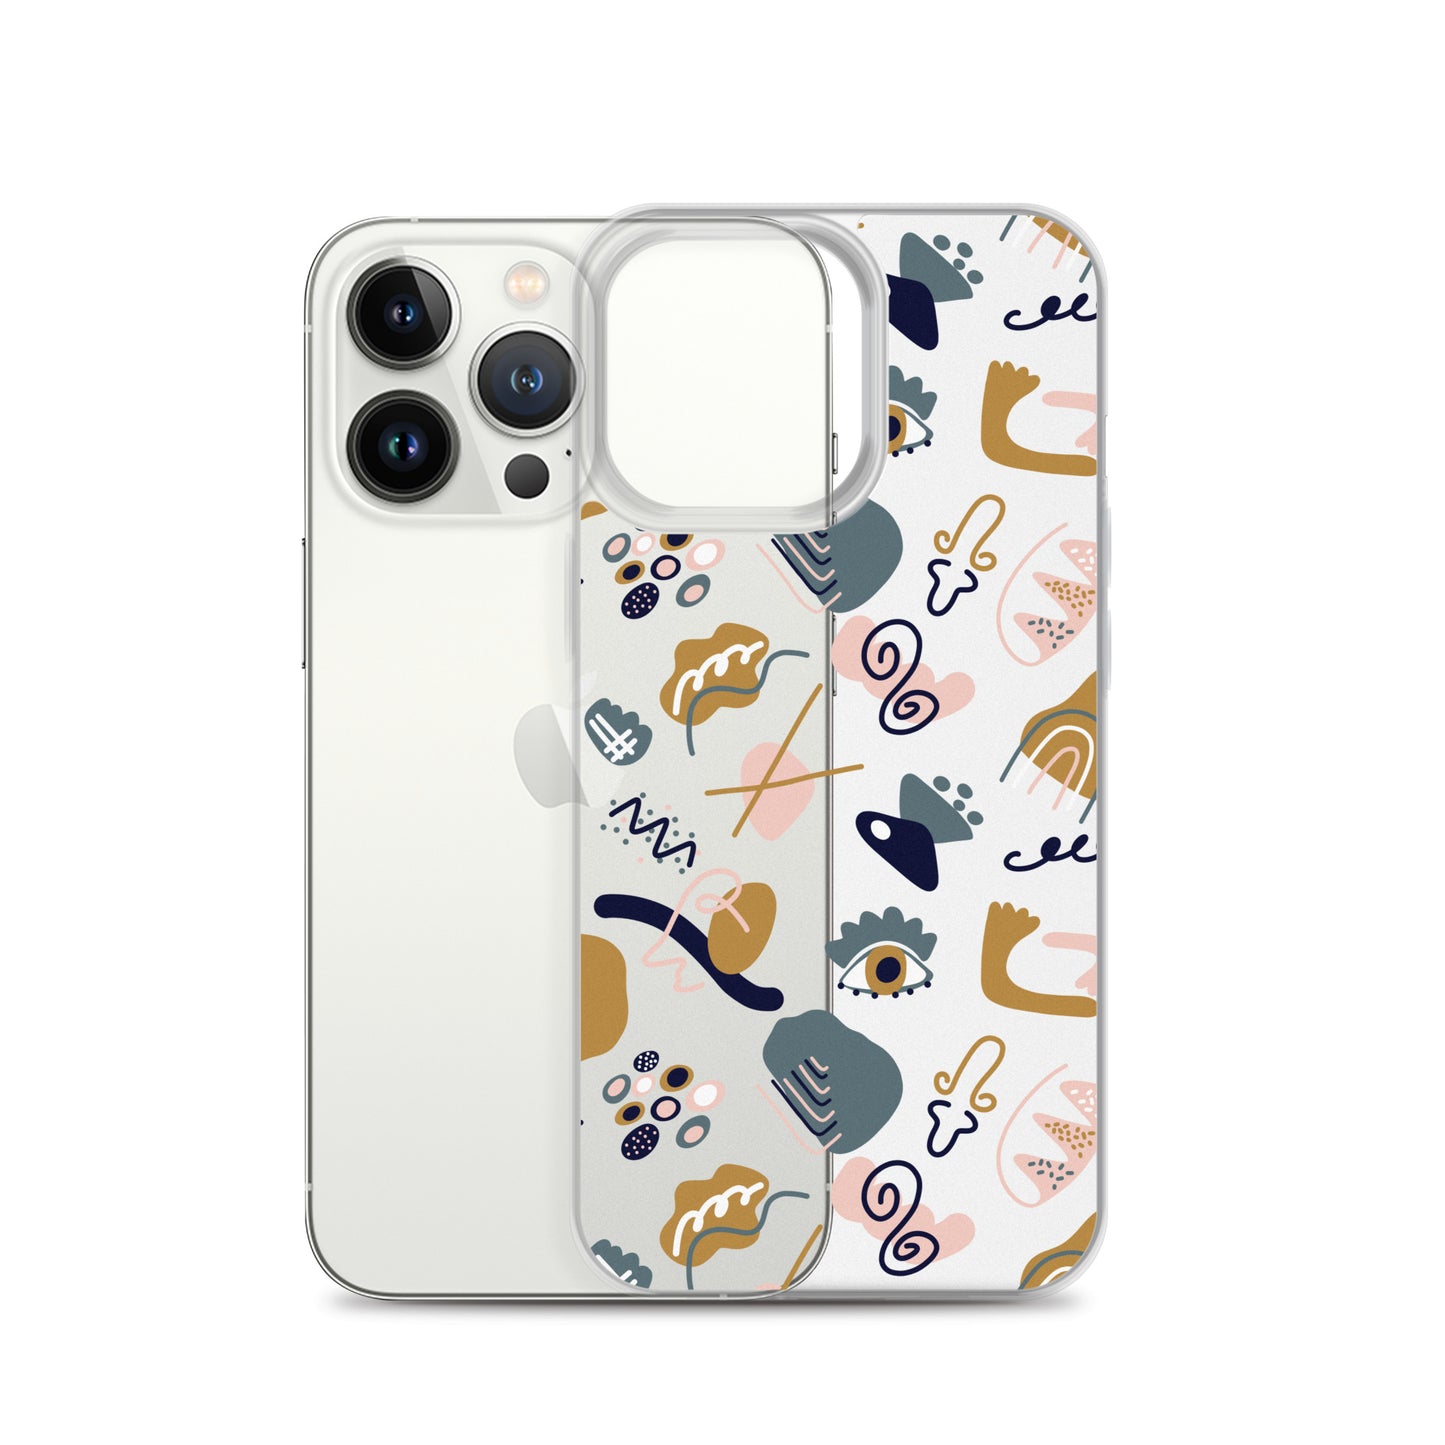 Abstract Hype Pattern iPhone Case